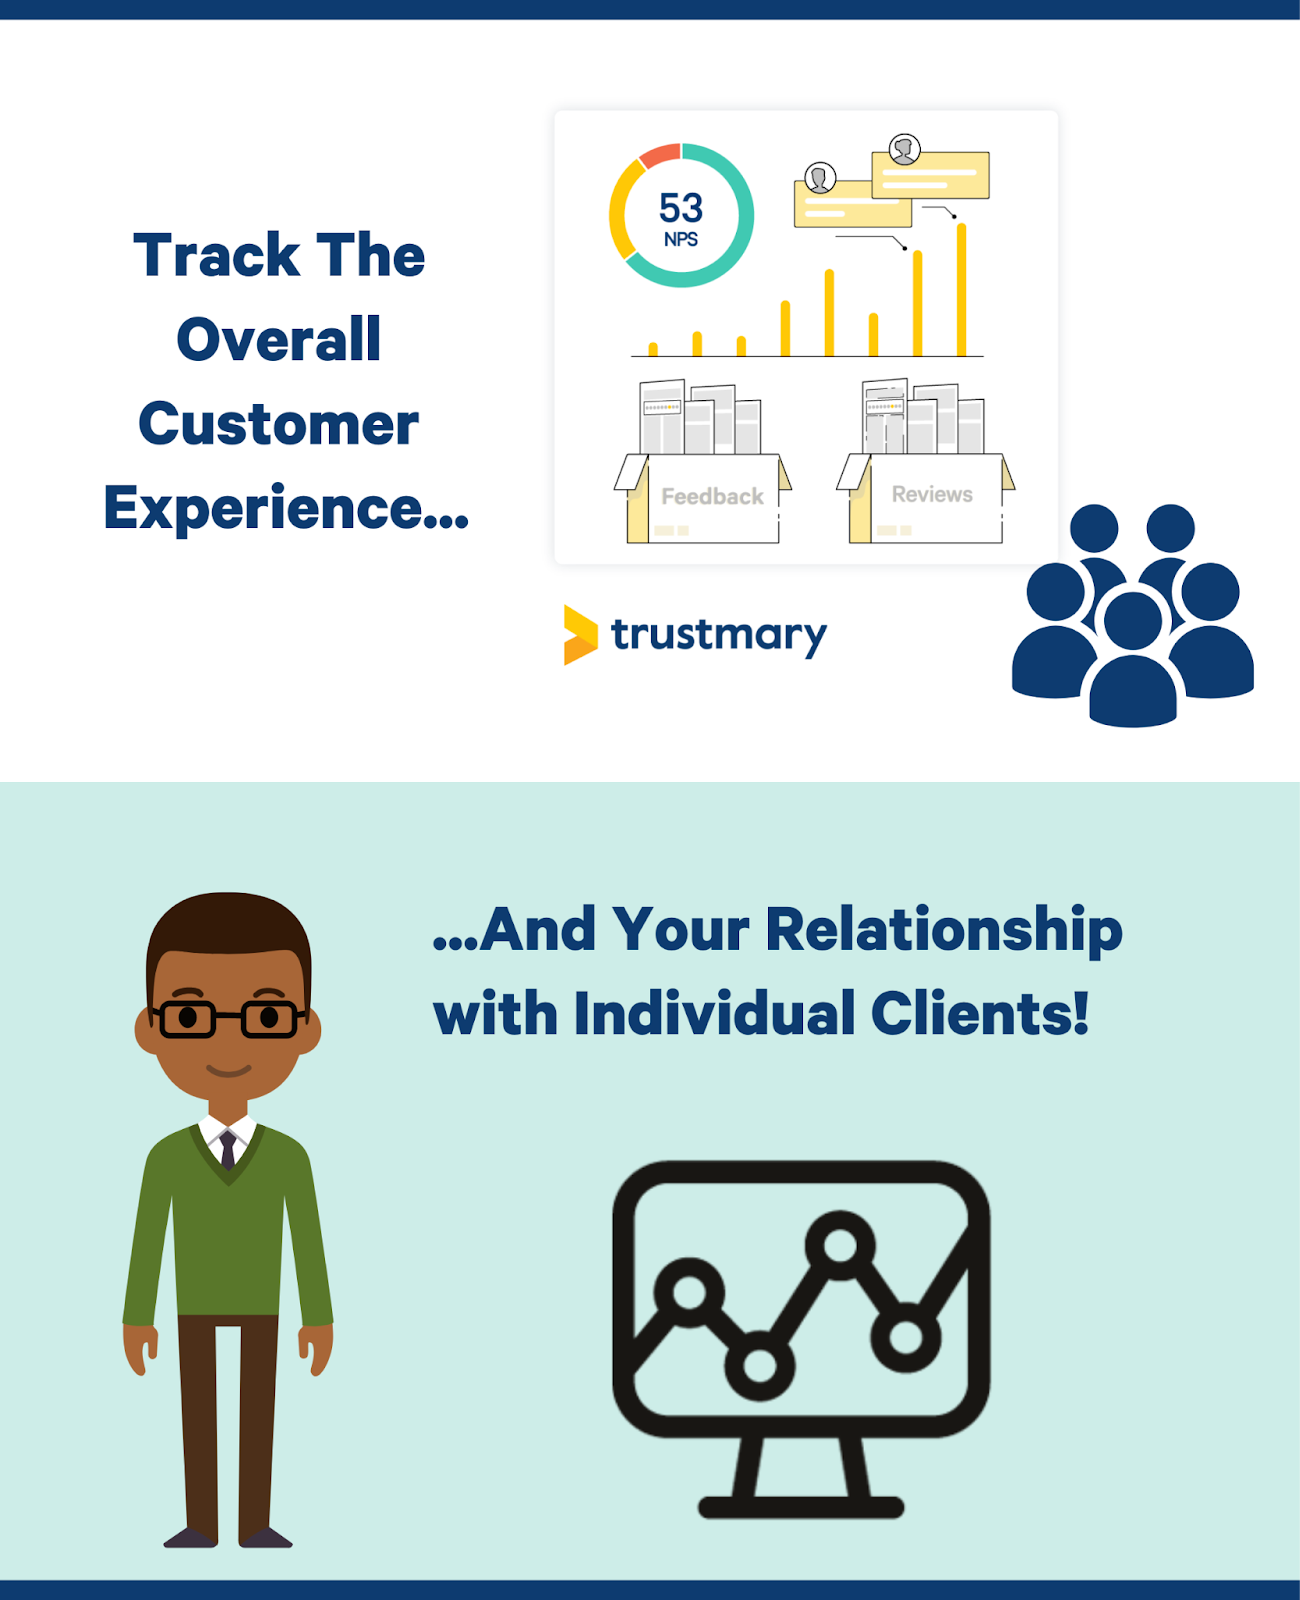 NPS helps track overall sentiment and individual customer relationships